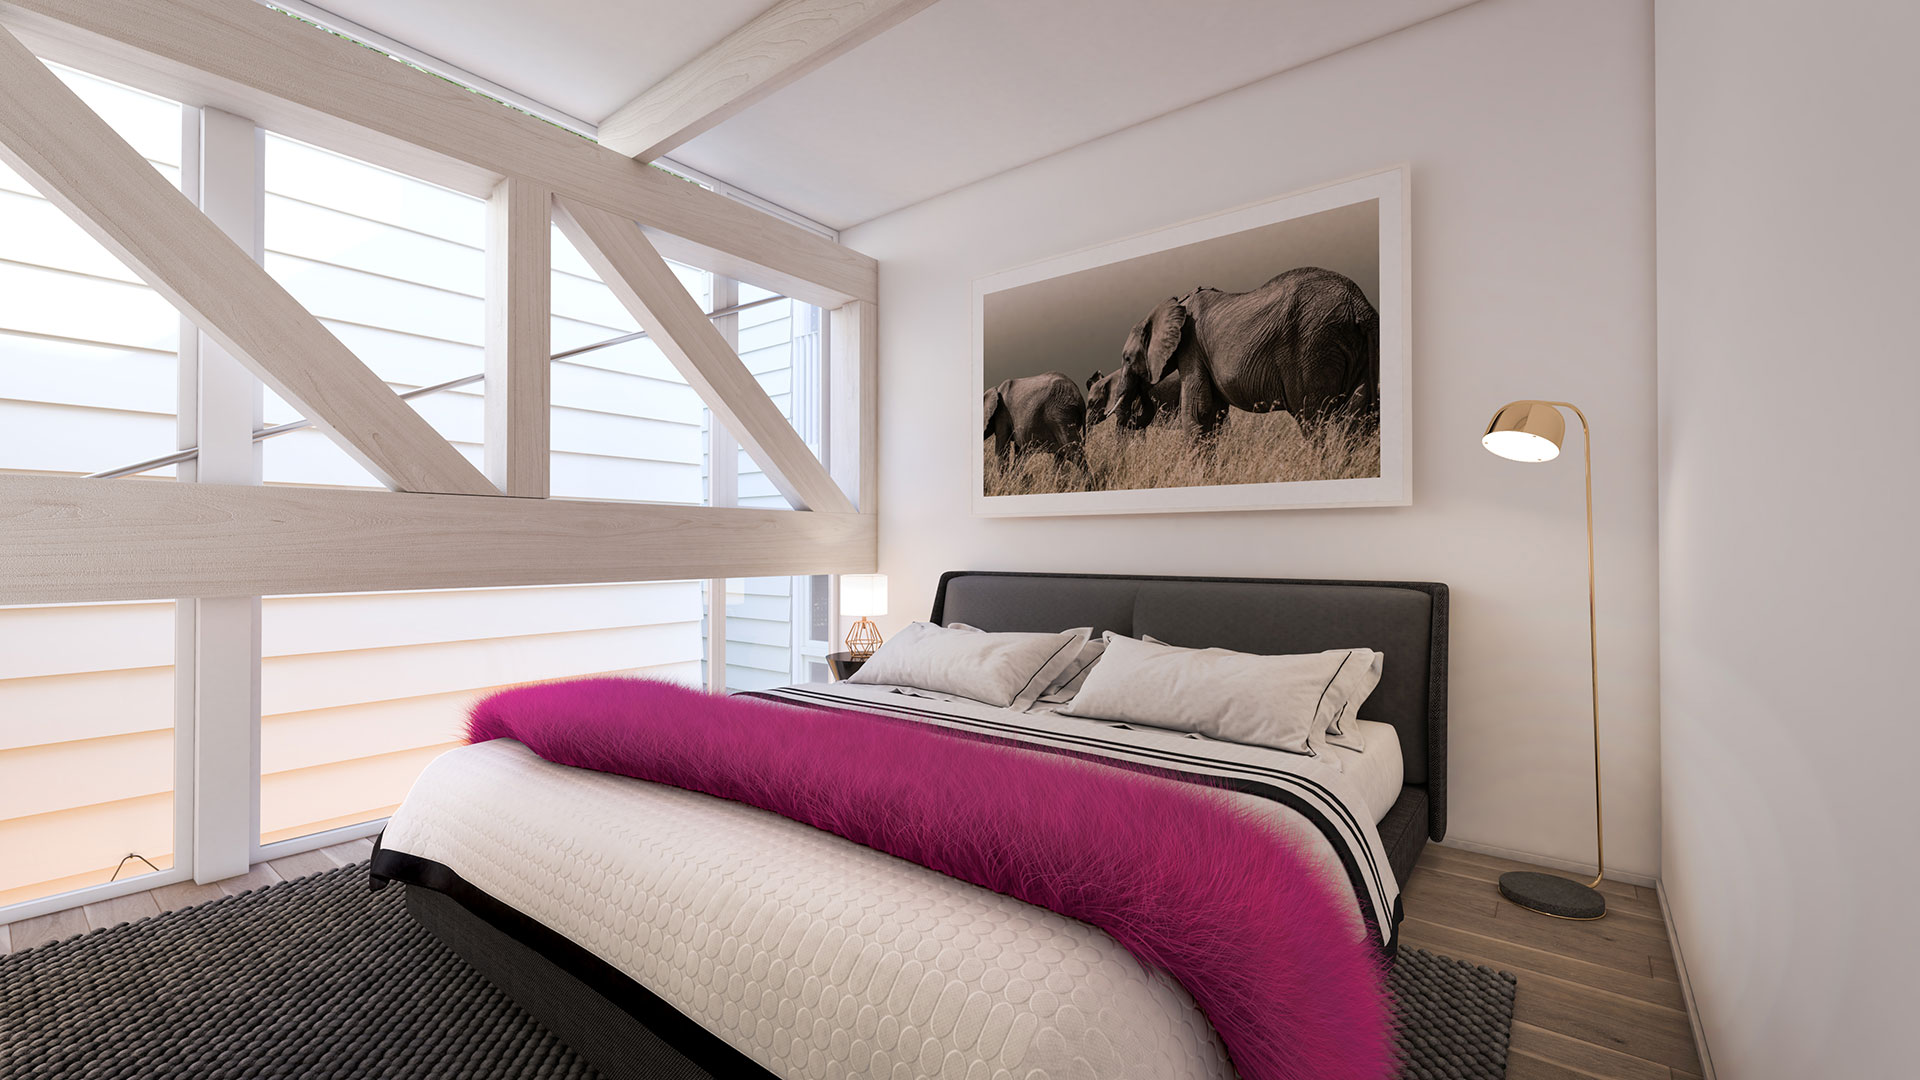 Turner's Dairy Townhouse Project - Unit 7 Bedroom Render